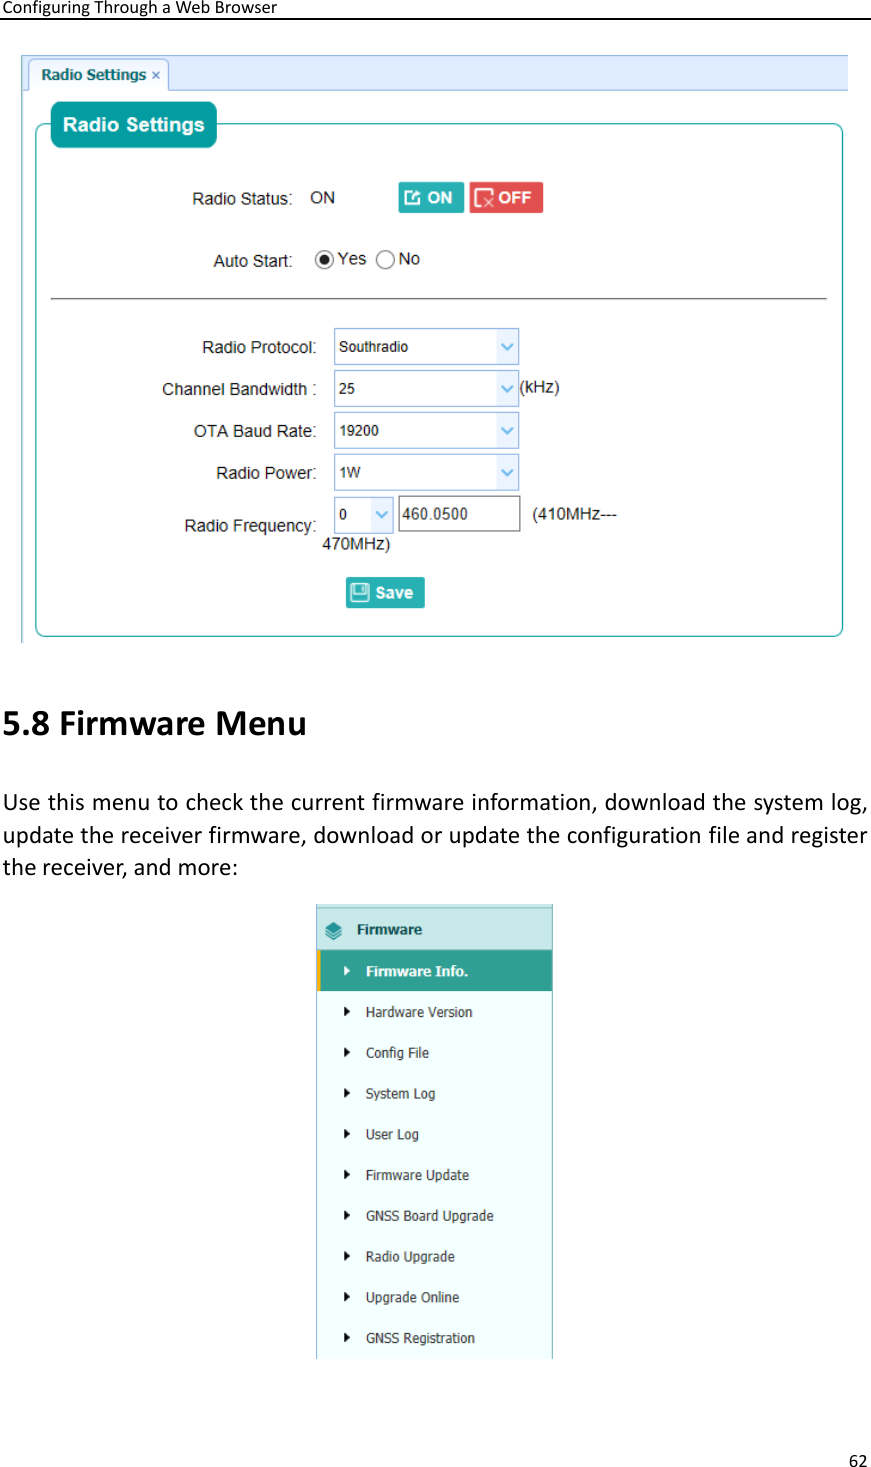 Configuring Through a Web Browser 62   5.8 Firmware Menu Use this menu to check the current firmware information, download the system log, update the receiver firmware, download or update the configuration file and register the receiver, and more:    